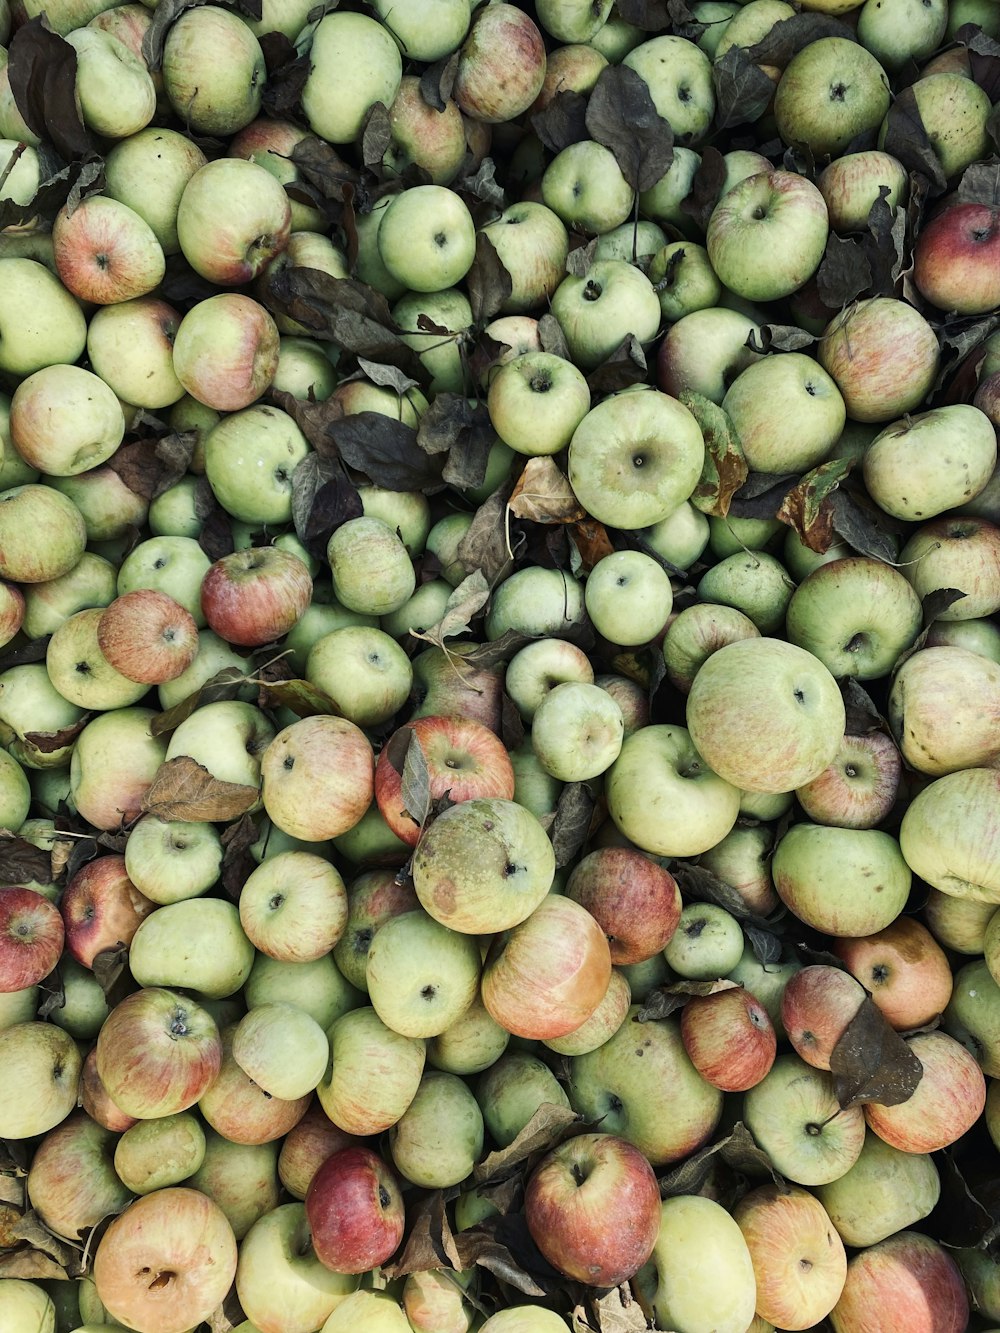 a large pile of green and red apples